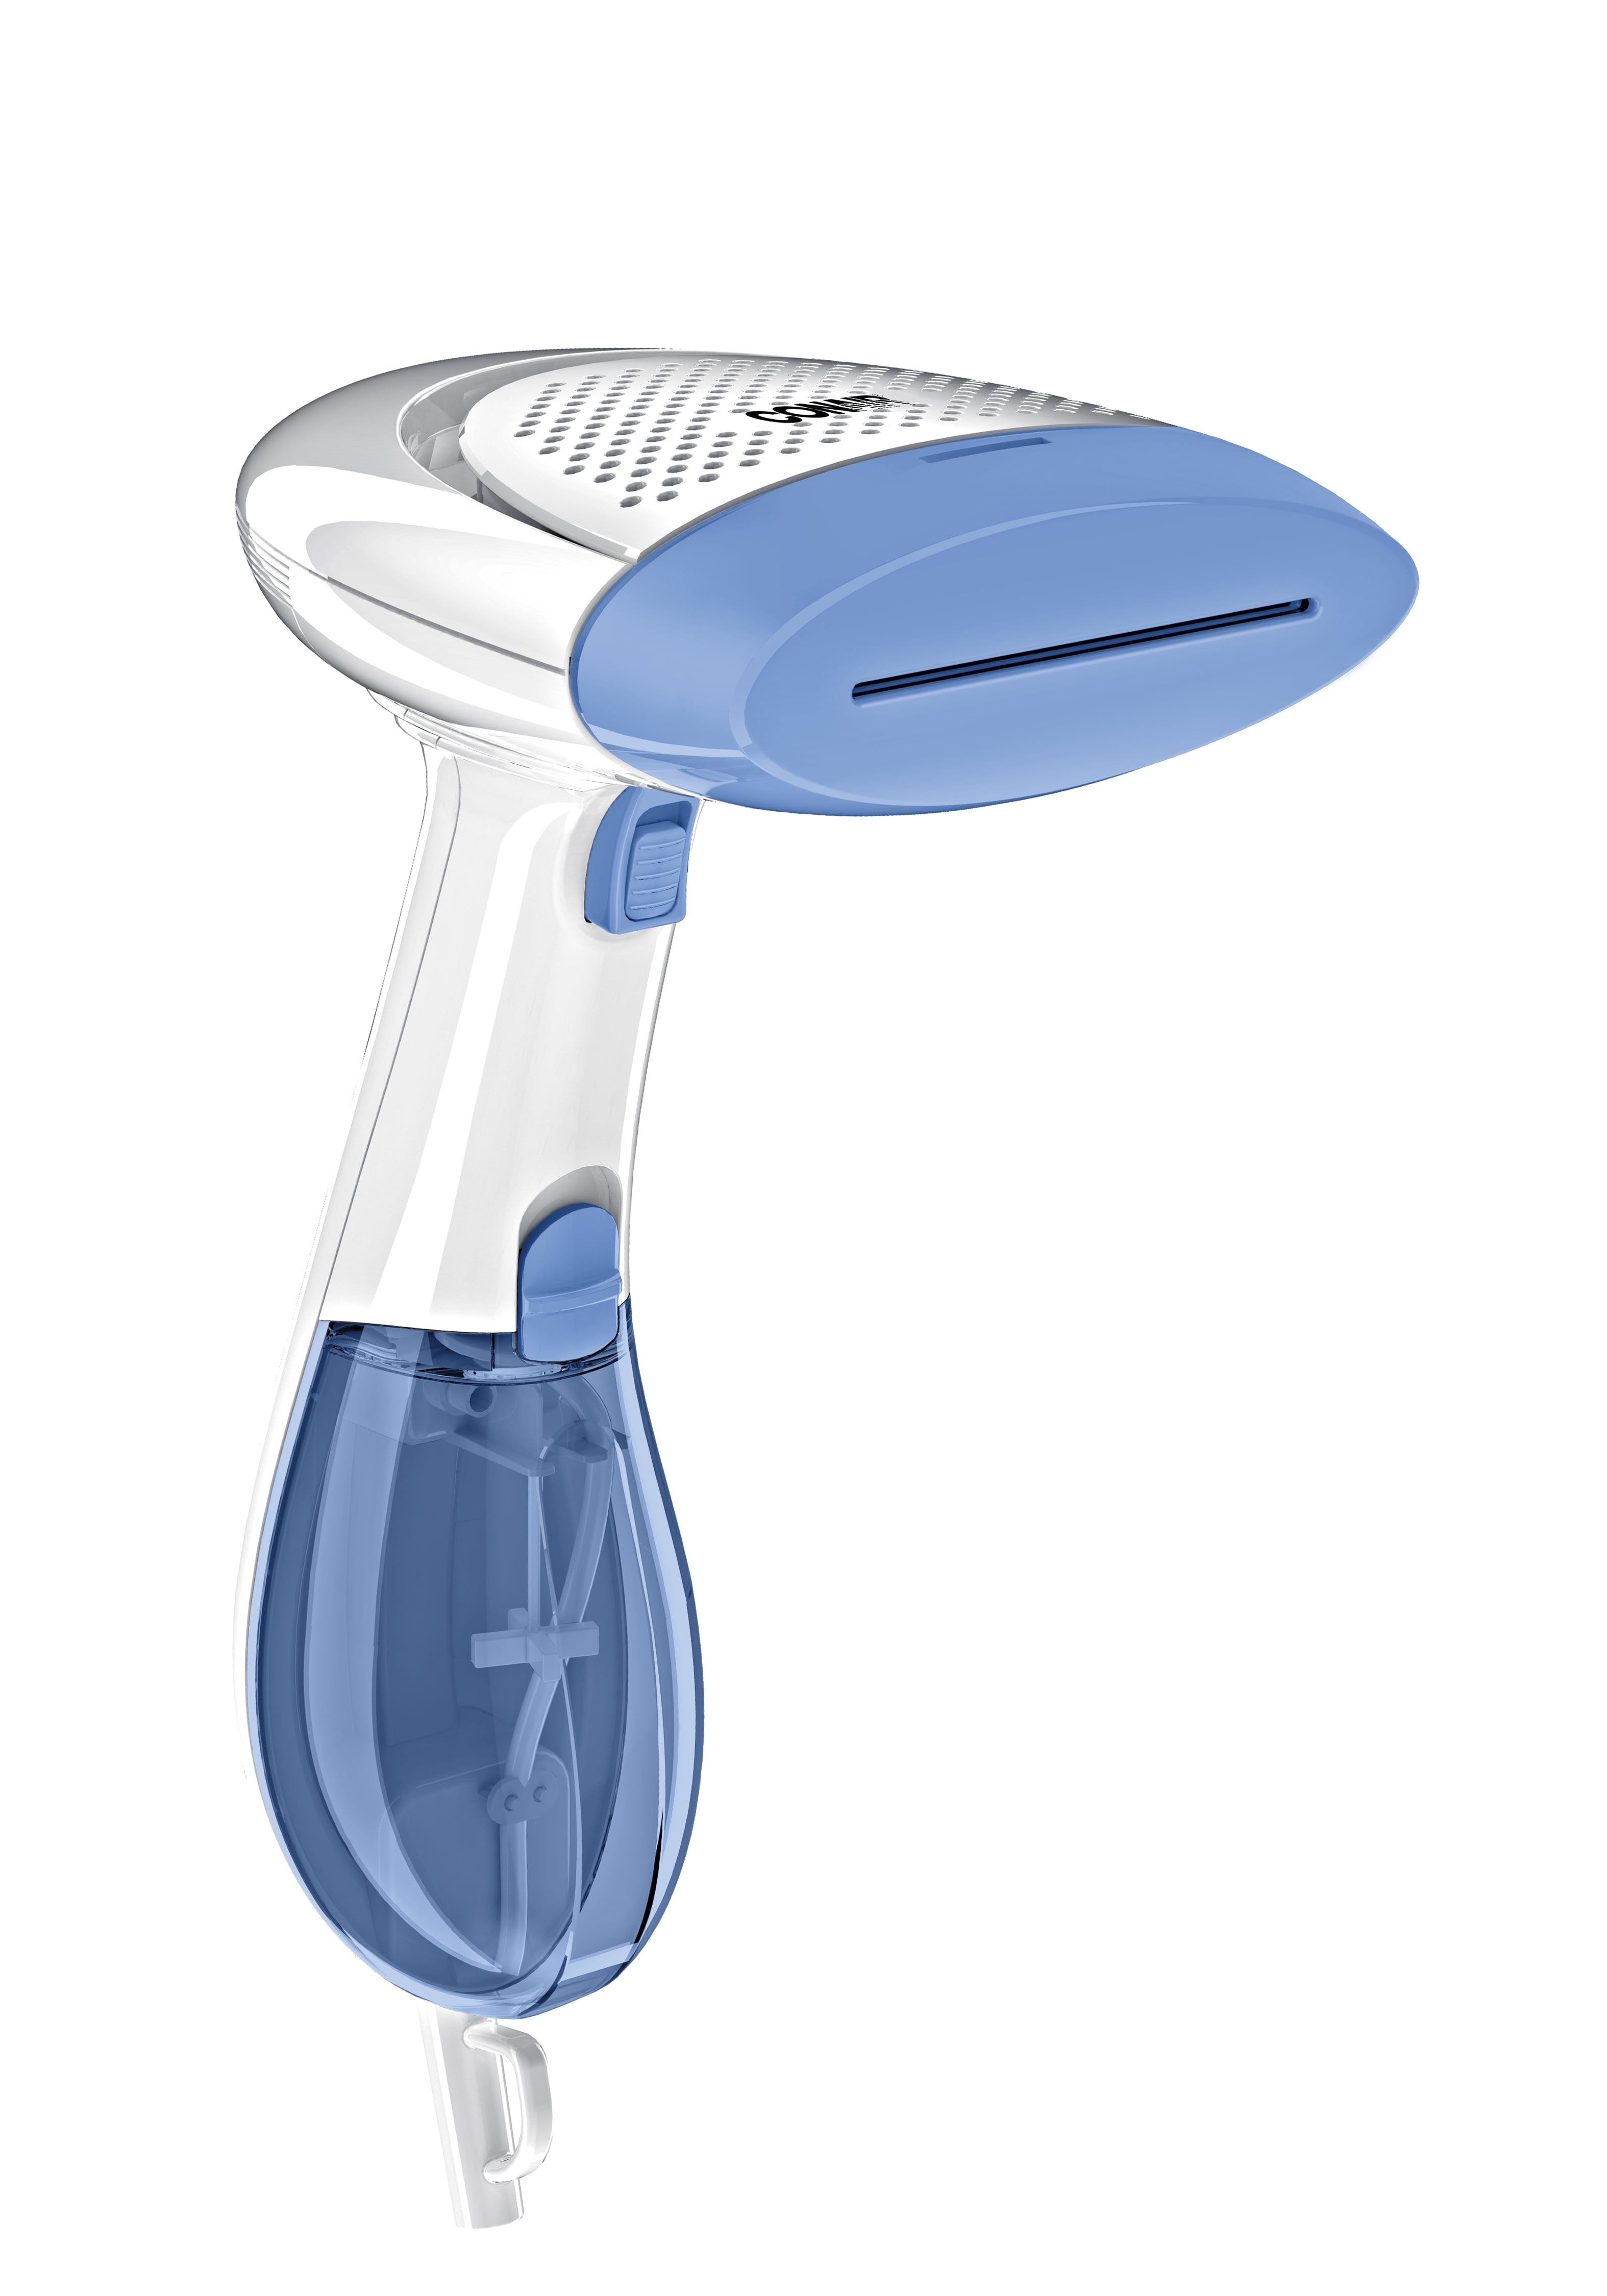 Conair Turbo Extreme Steam Handheld Fabric Steamer Wt Smart Touch Sensor Control 